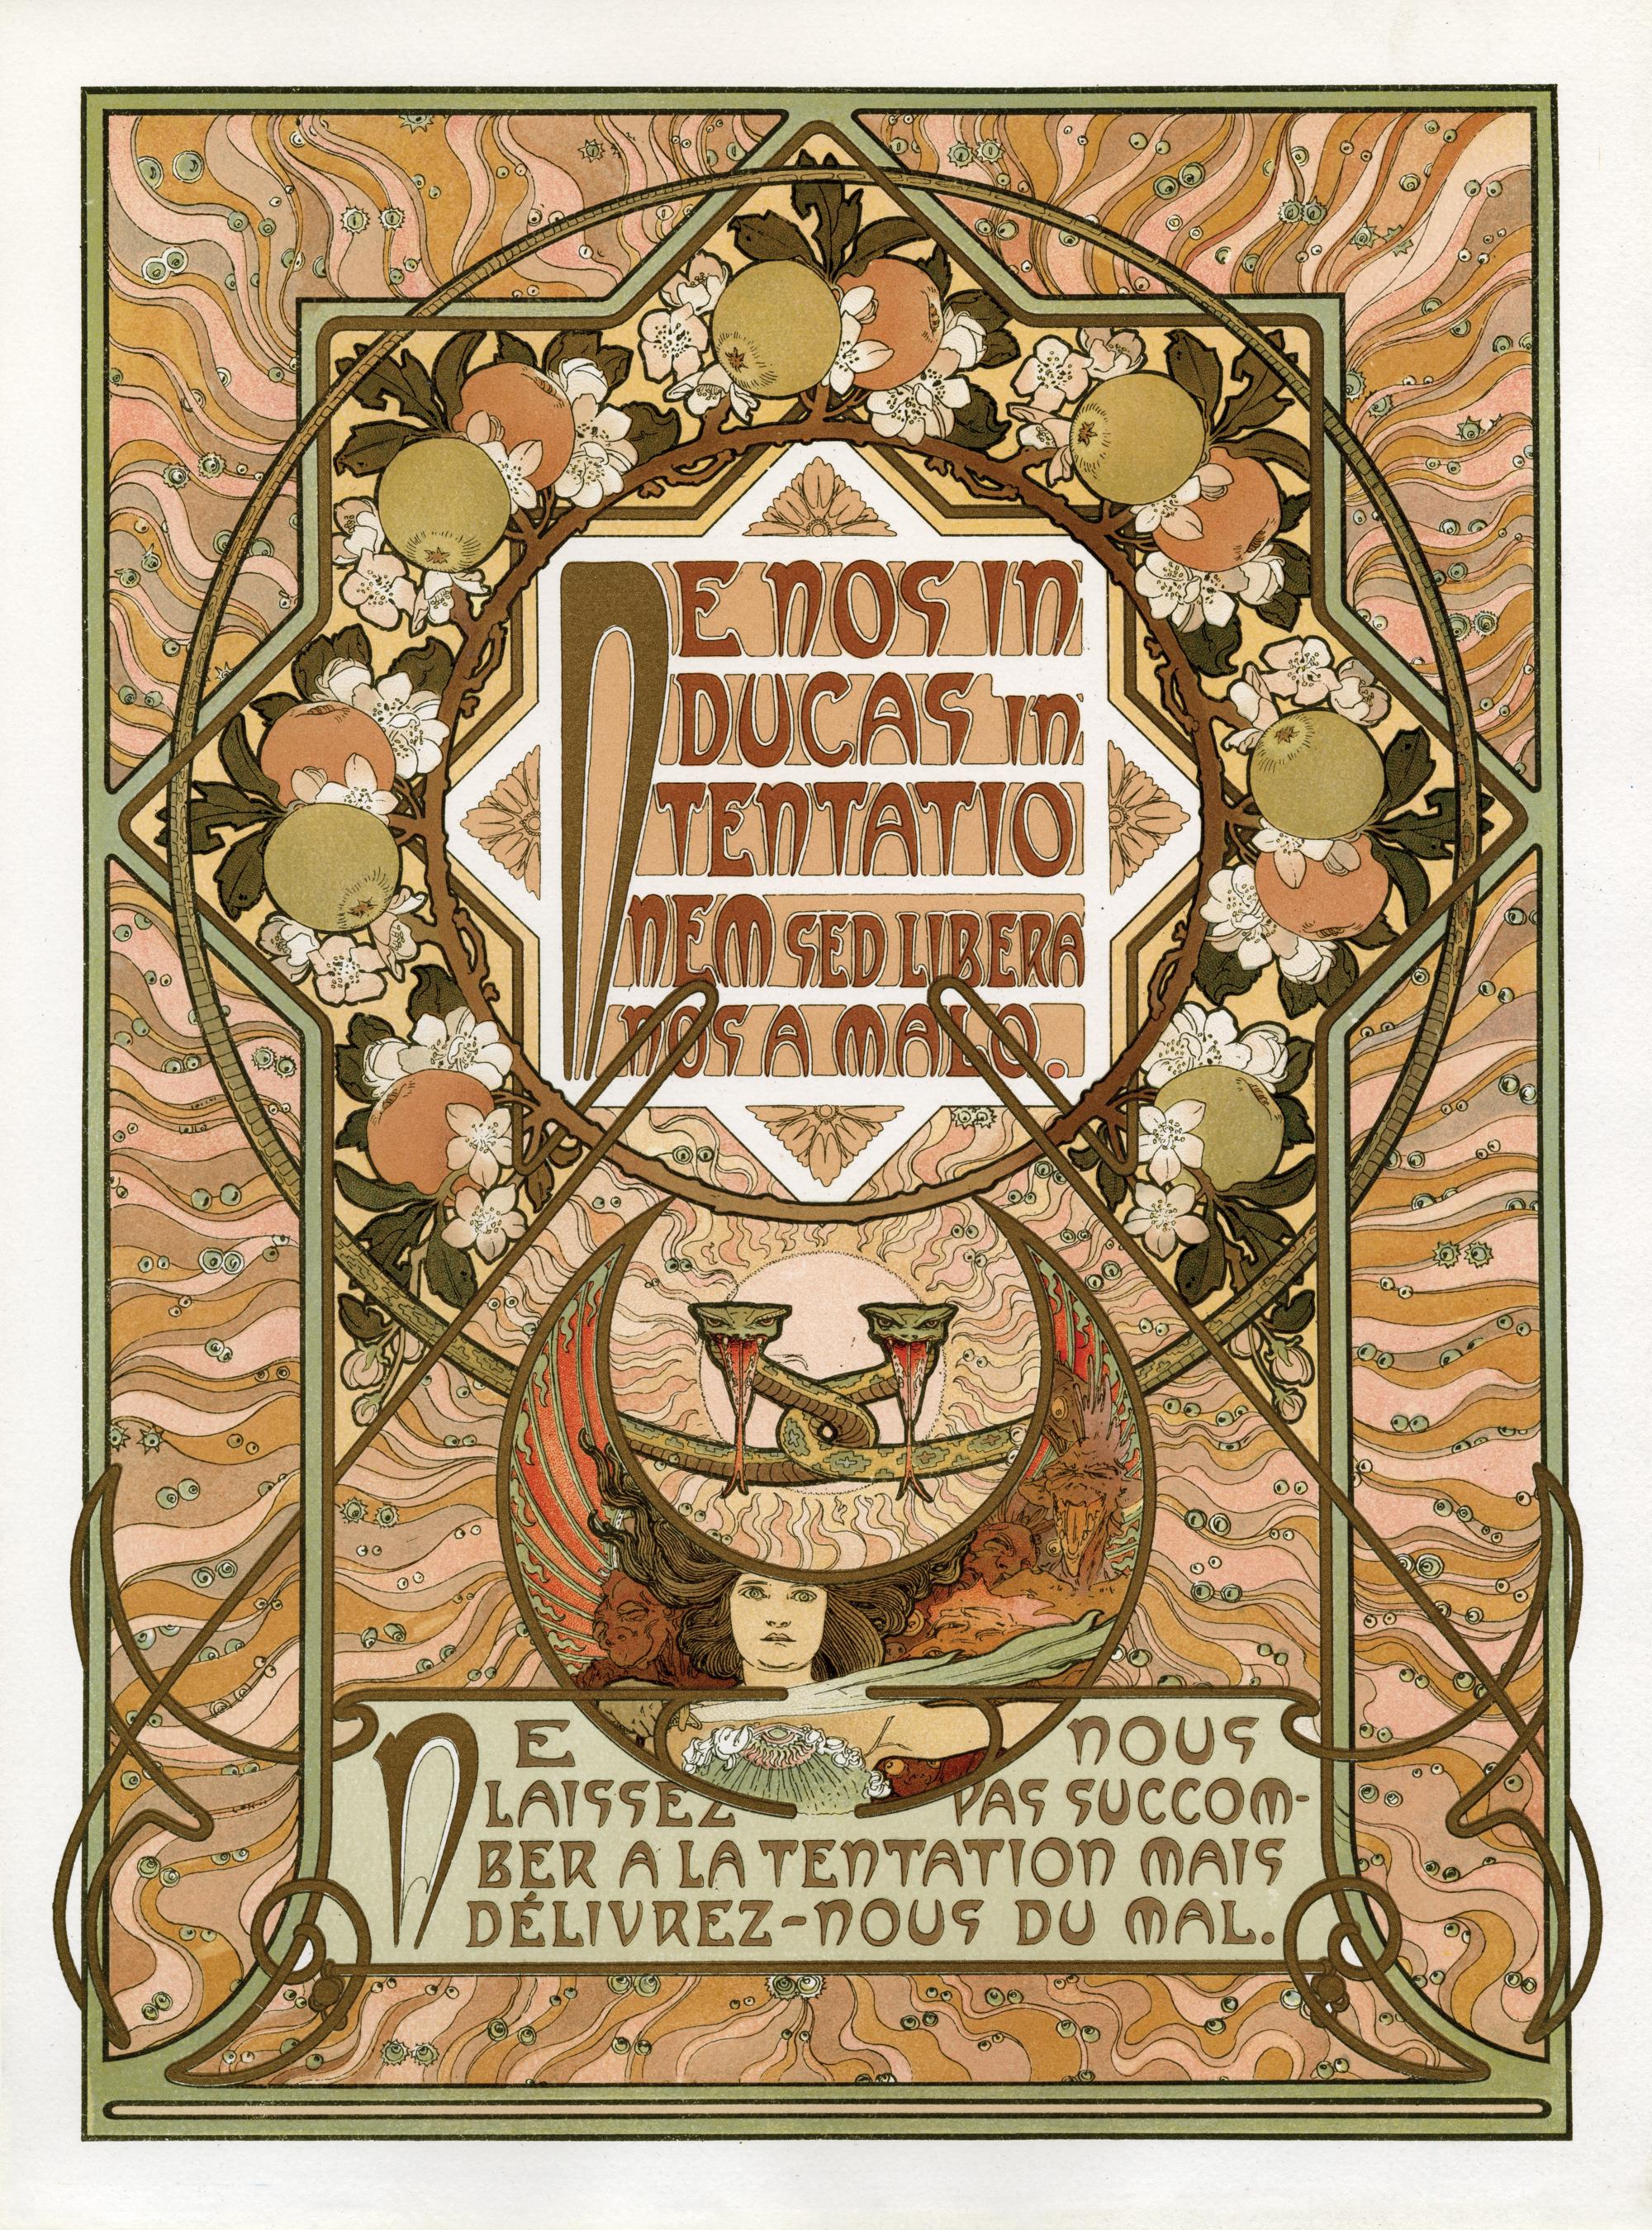 Alphonse Mucha worked mainly as a poster artist and became an influential figure of Art Nouveau in late 1890s, when poster illustrations were emerging as popular art form and new printing processes were developed.

He designed and published